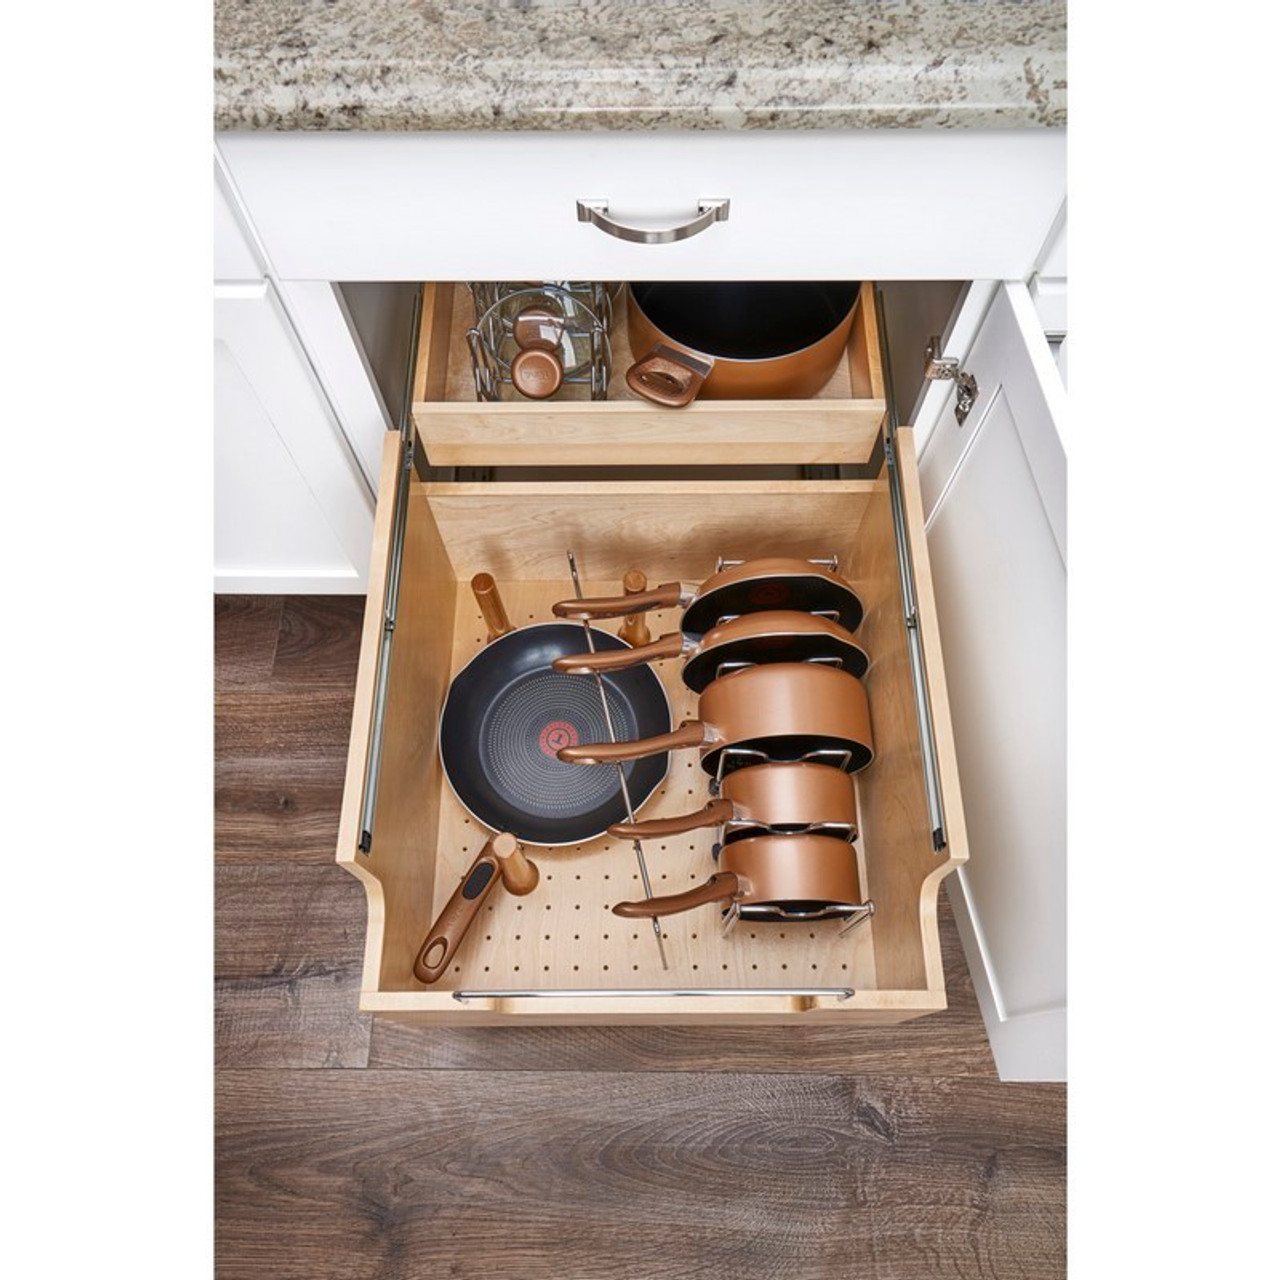  Rev-A-Shelf 18 Divided Storage Bin for Kitchen or Bathroom  Cabinets, Food Storage Containers/Utensils Organizer with Soft Close, Wood,  4FSCO-18SC-1: Home & Kitchen